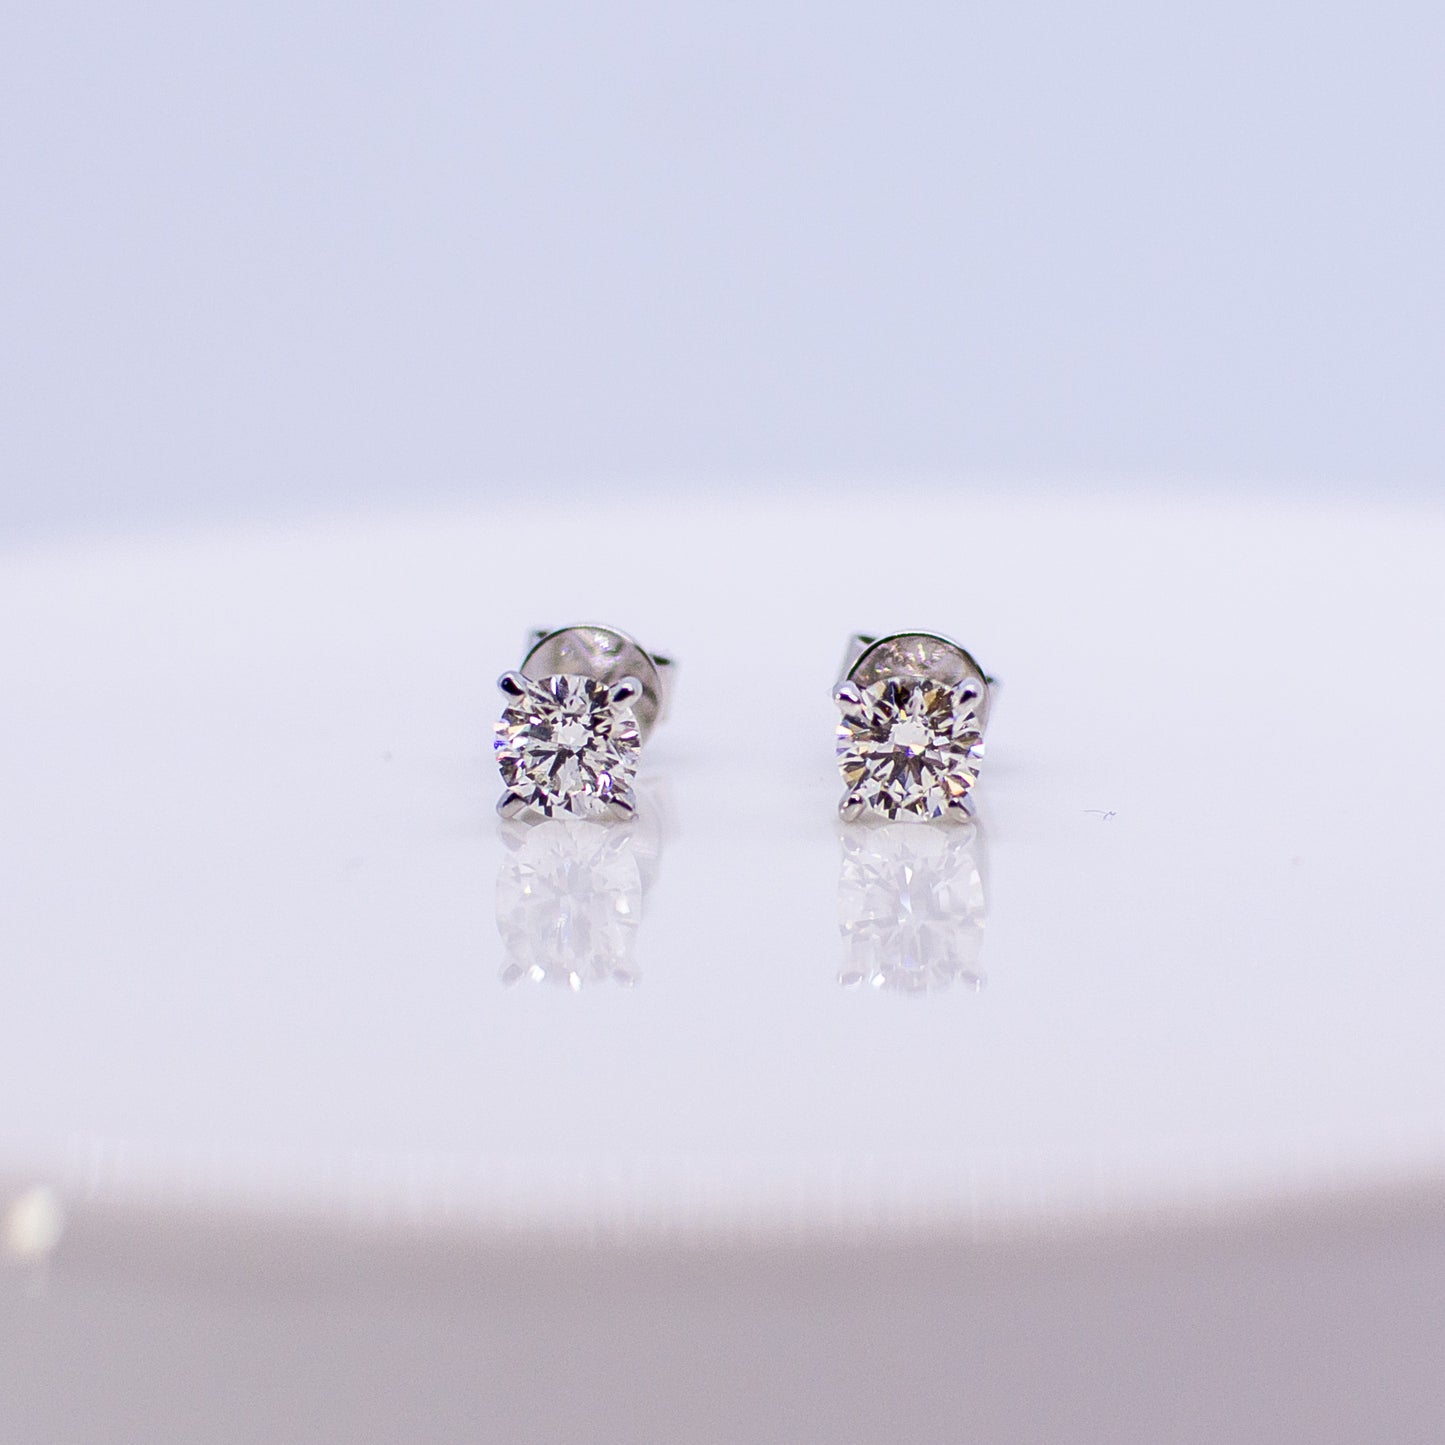 18ct White Gold 1ct Diamond Stud Earrings Each diamond is set in a classic four claw setting.  1ct in total approximately.  18ct white gold stud earrings with butterfly backs.